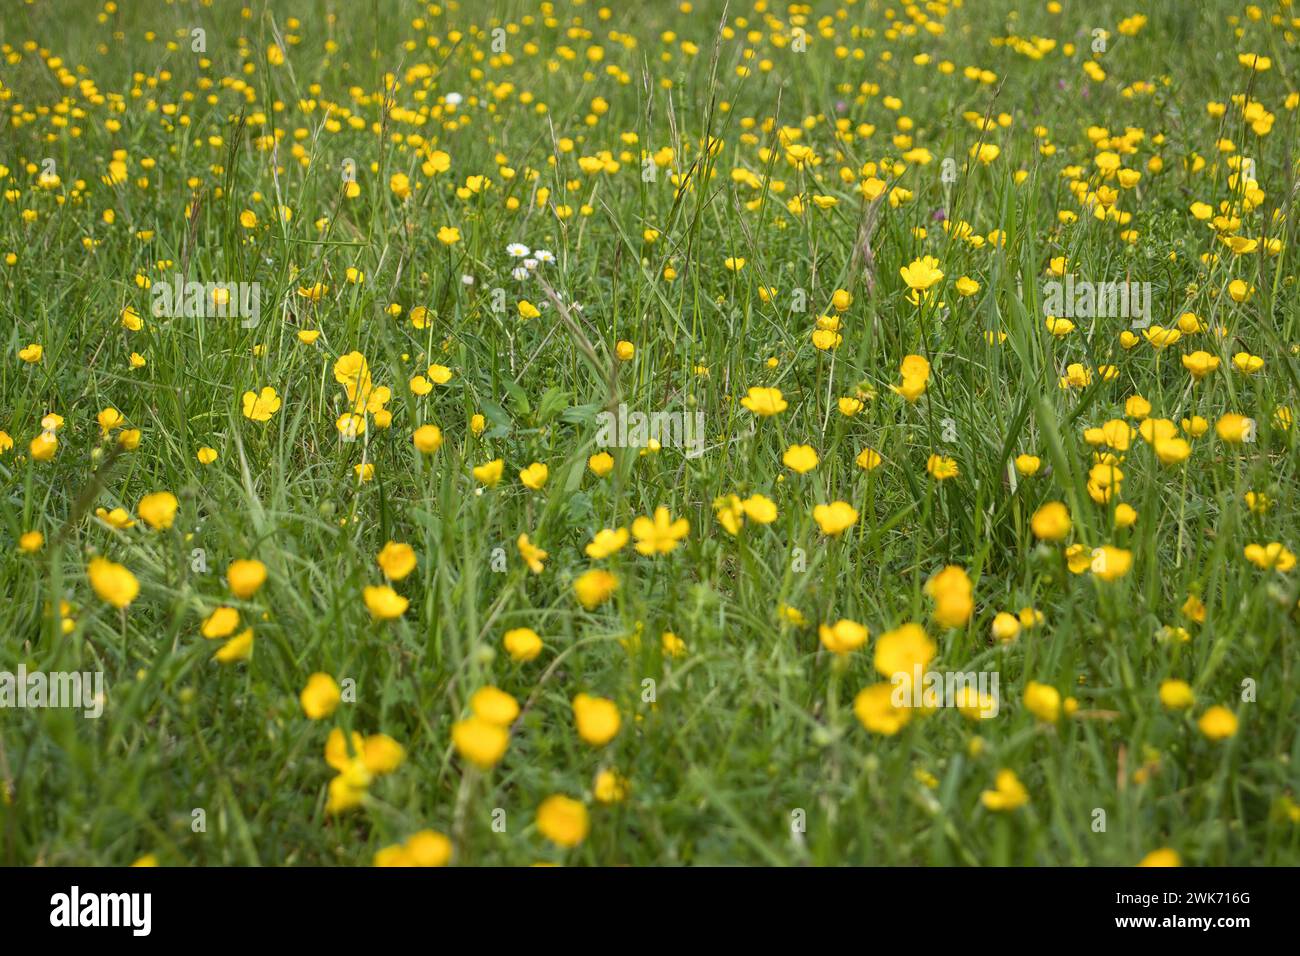 A few small white flowers in a field of green grass and yellow flowres on a spirng day in Rhineland Palatinate, Germany. Stock Photo